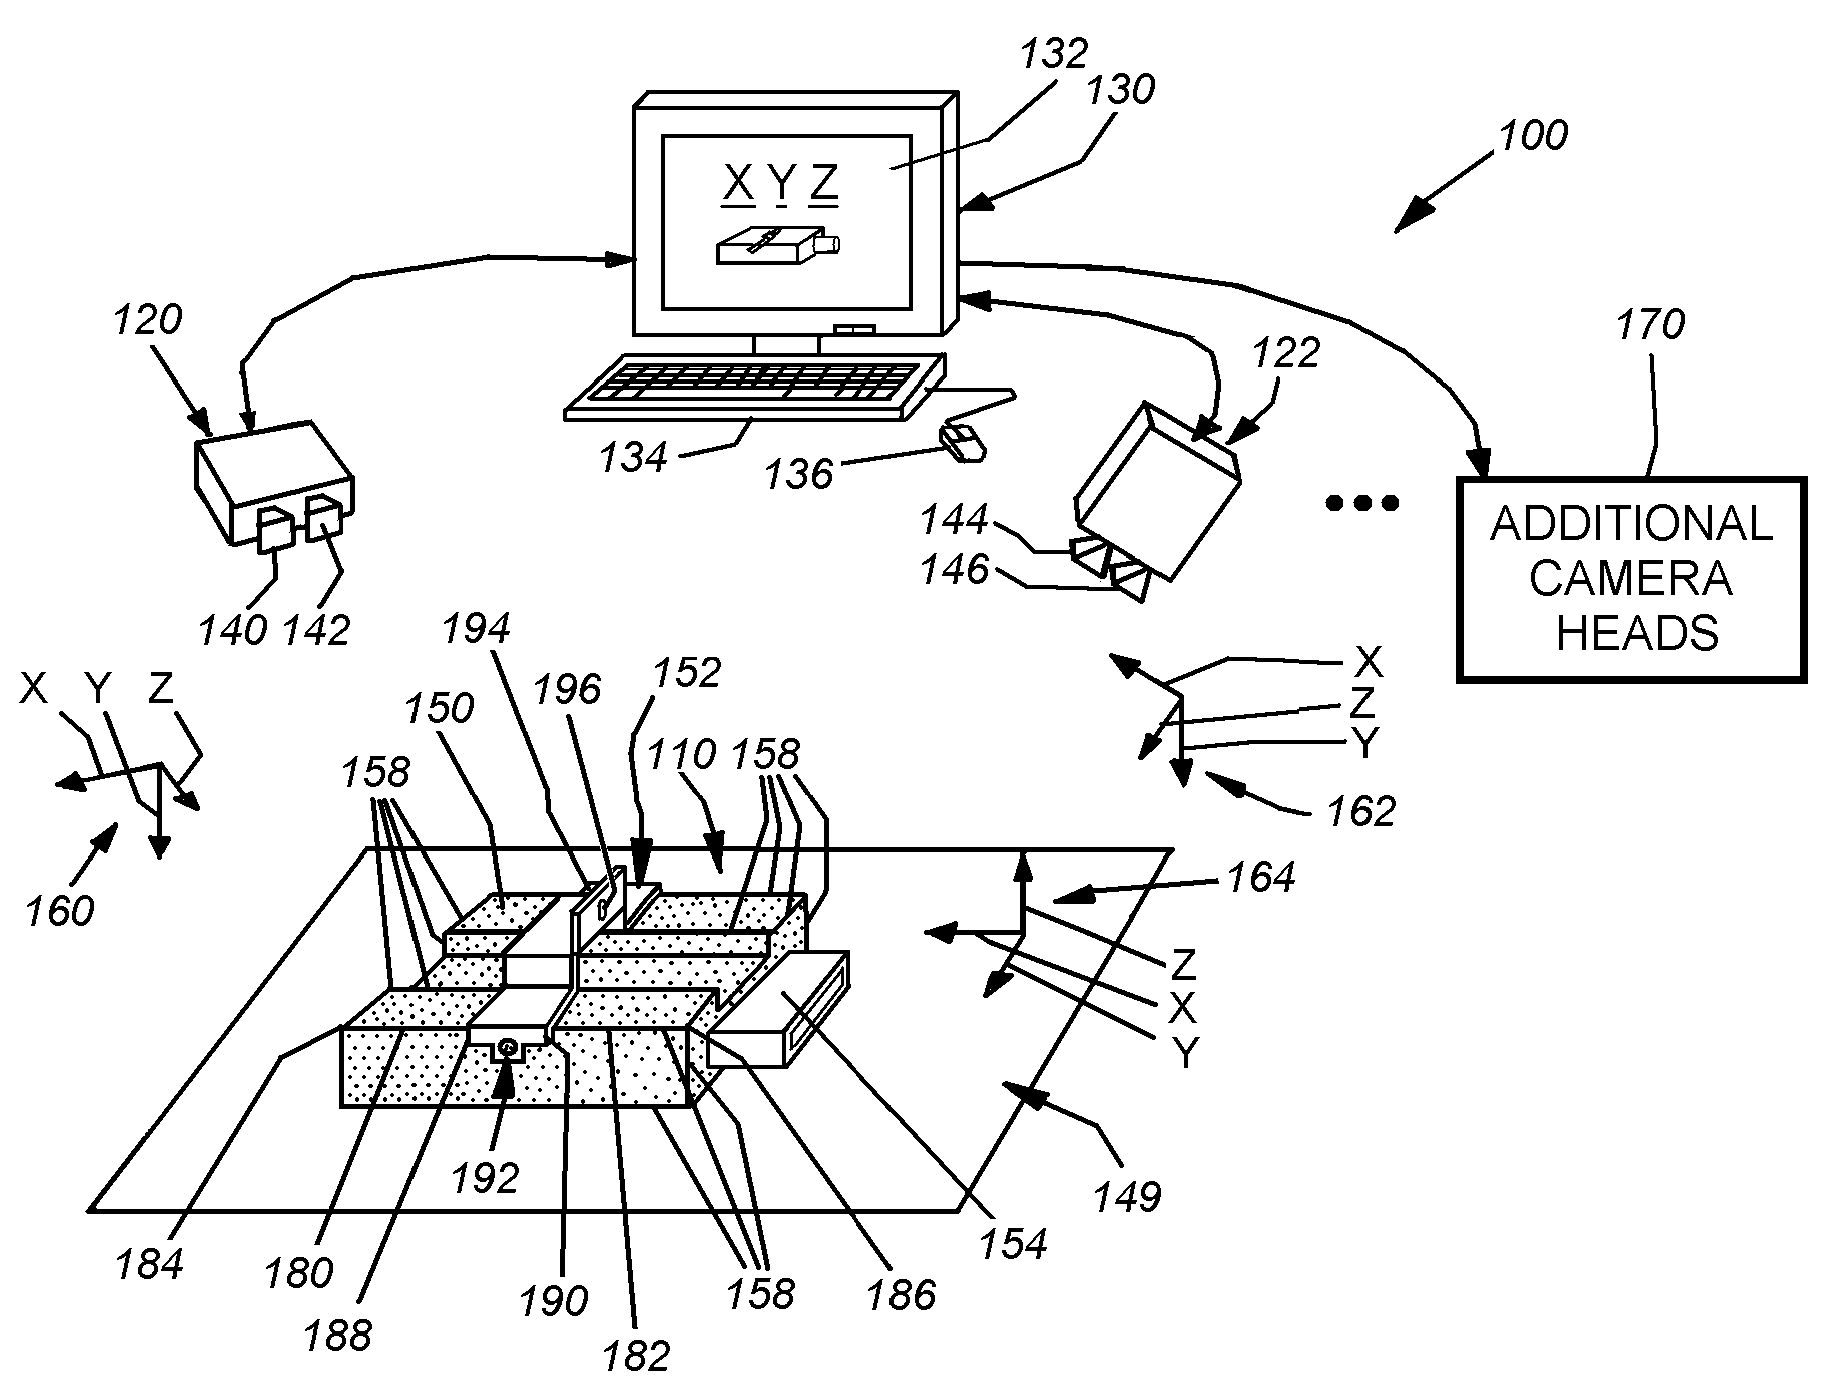 System and method for three-dimensional alignment of objects using machine vision